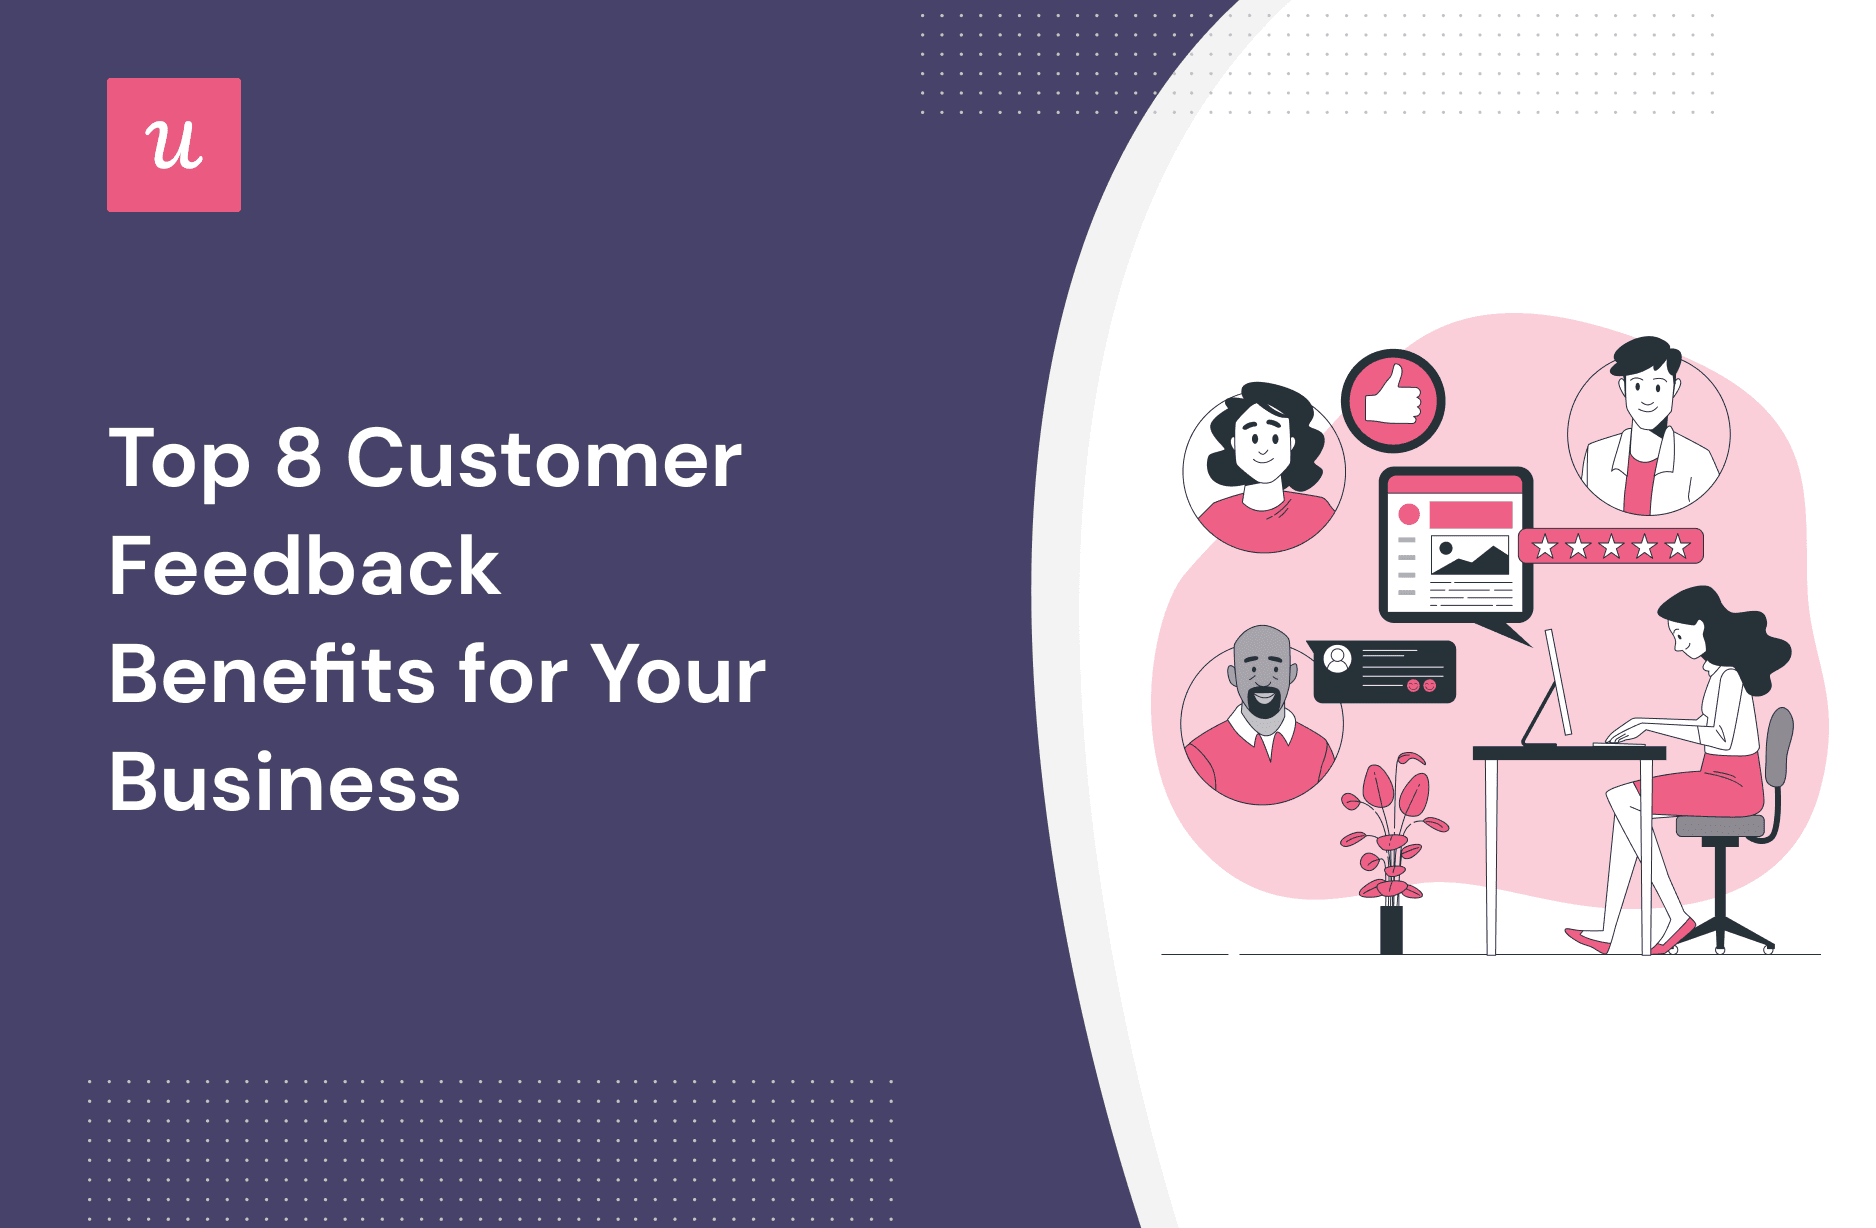 Top 8 Customer Feedback Benefits for Your Business cover